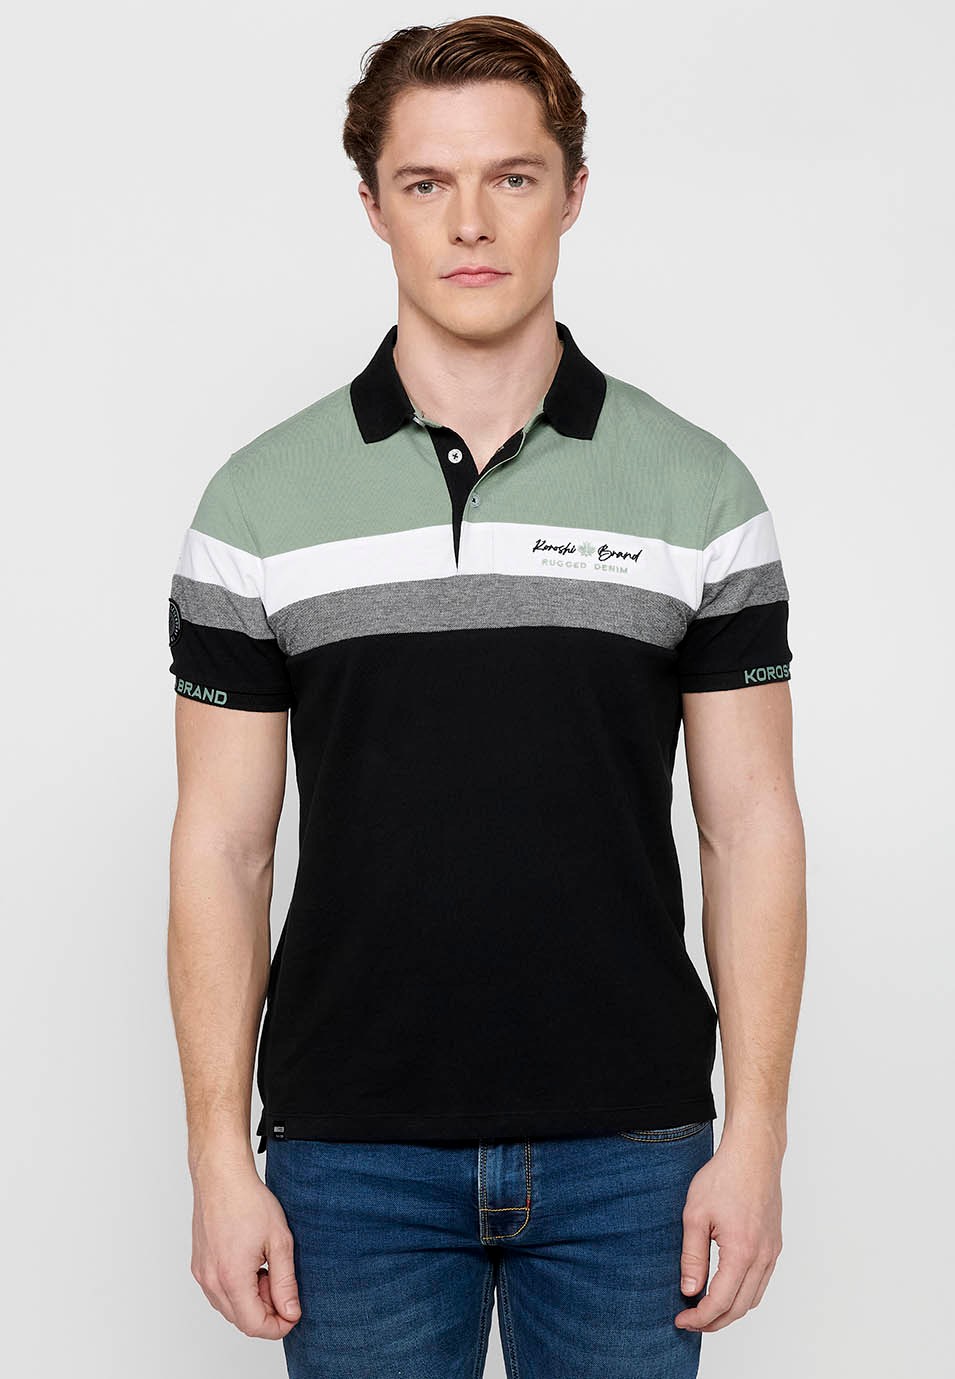 100% cotton short-sleeved polo shirt, striped detail on the chest, black color for men 4